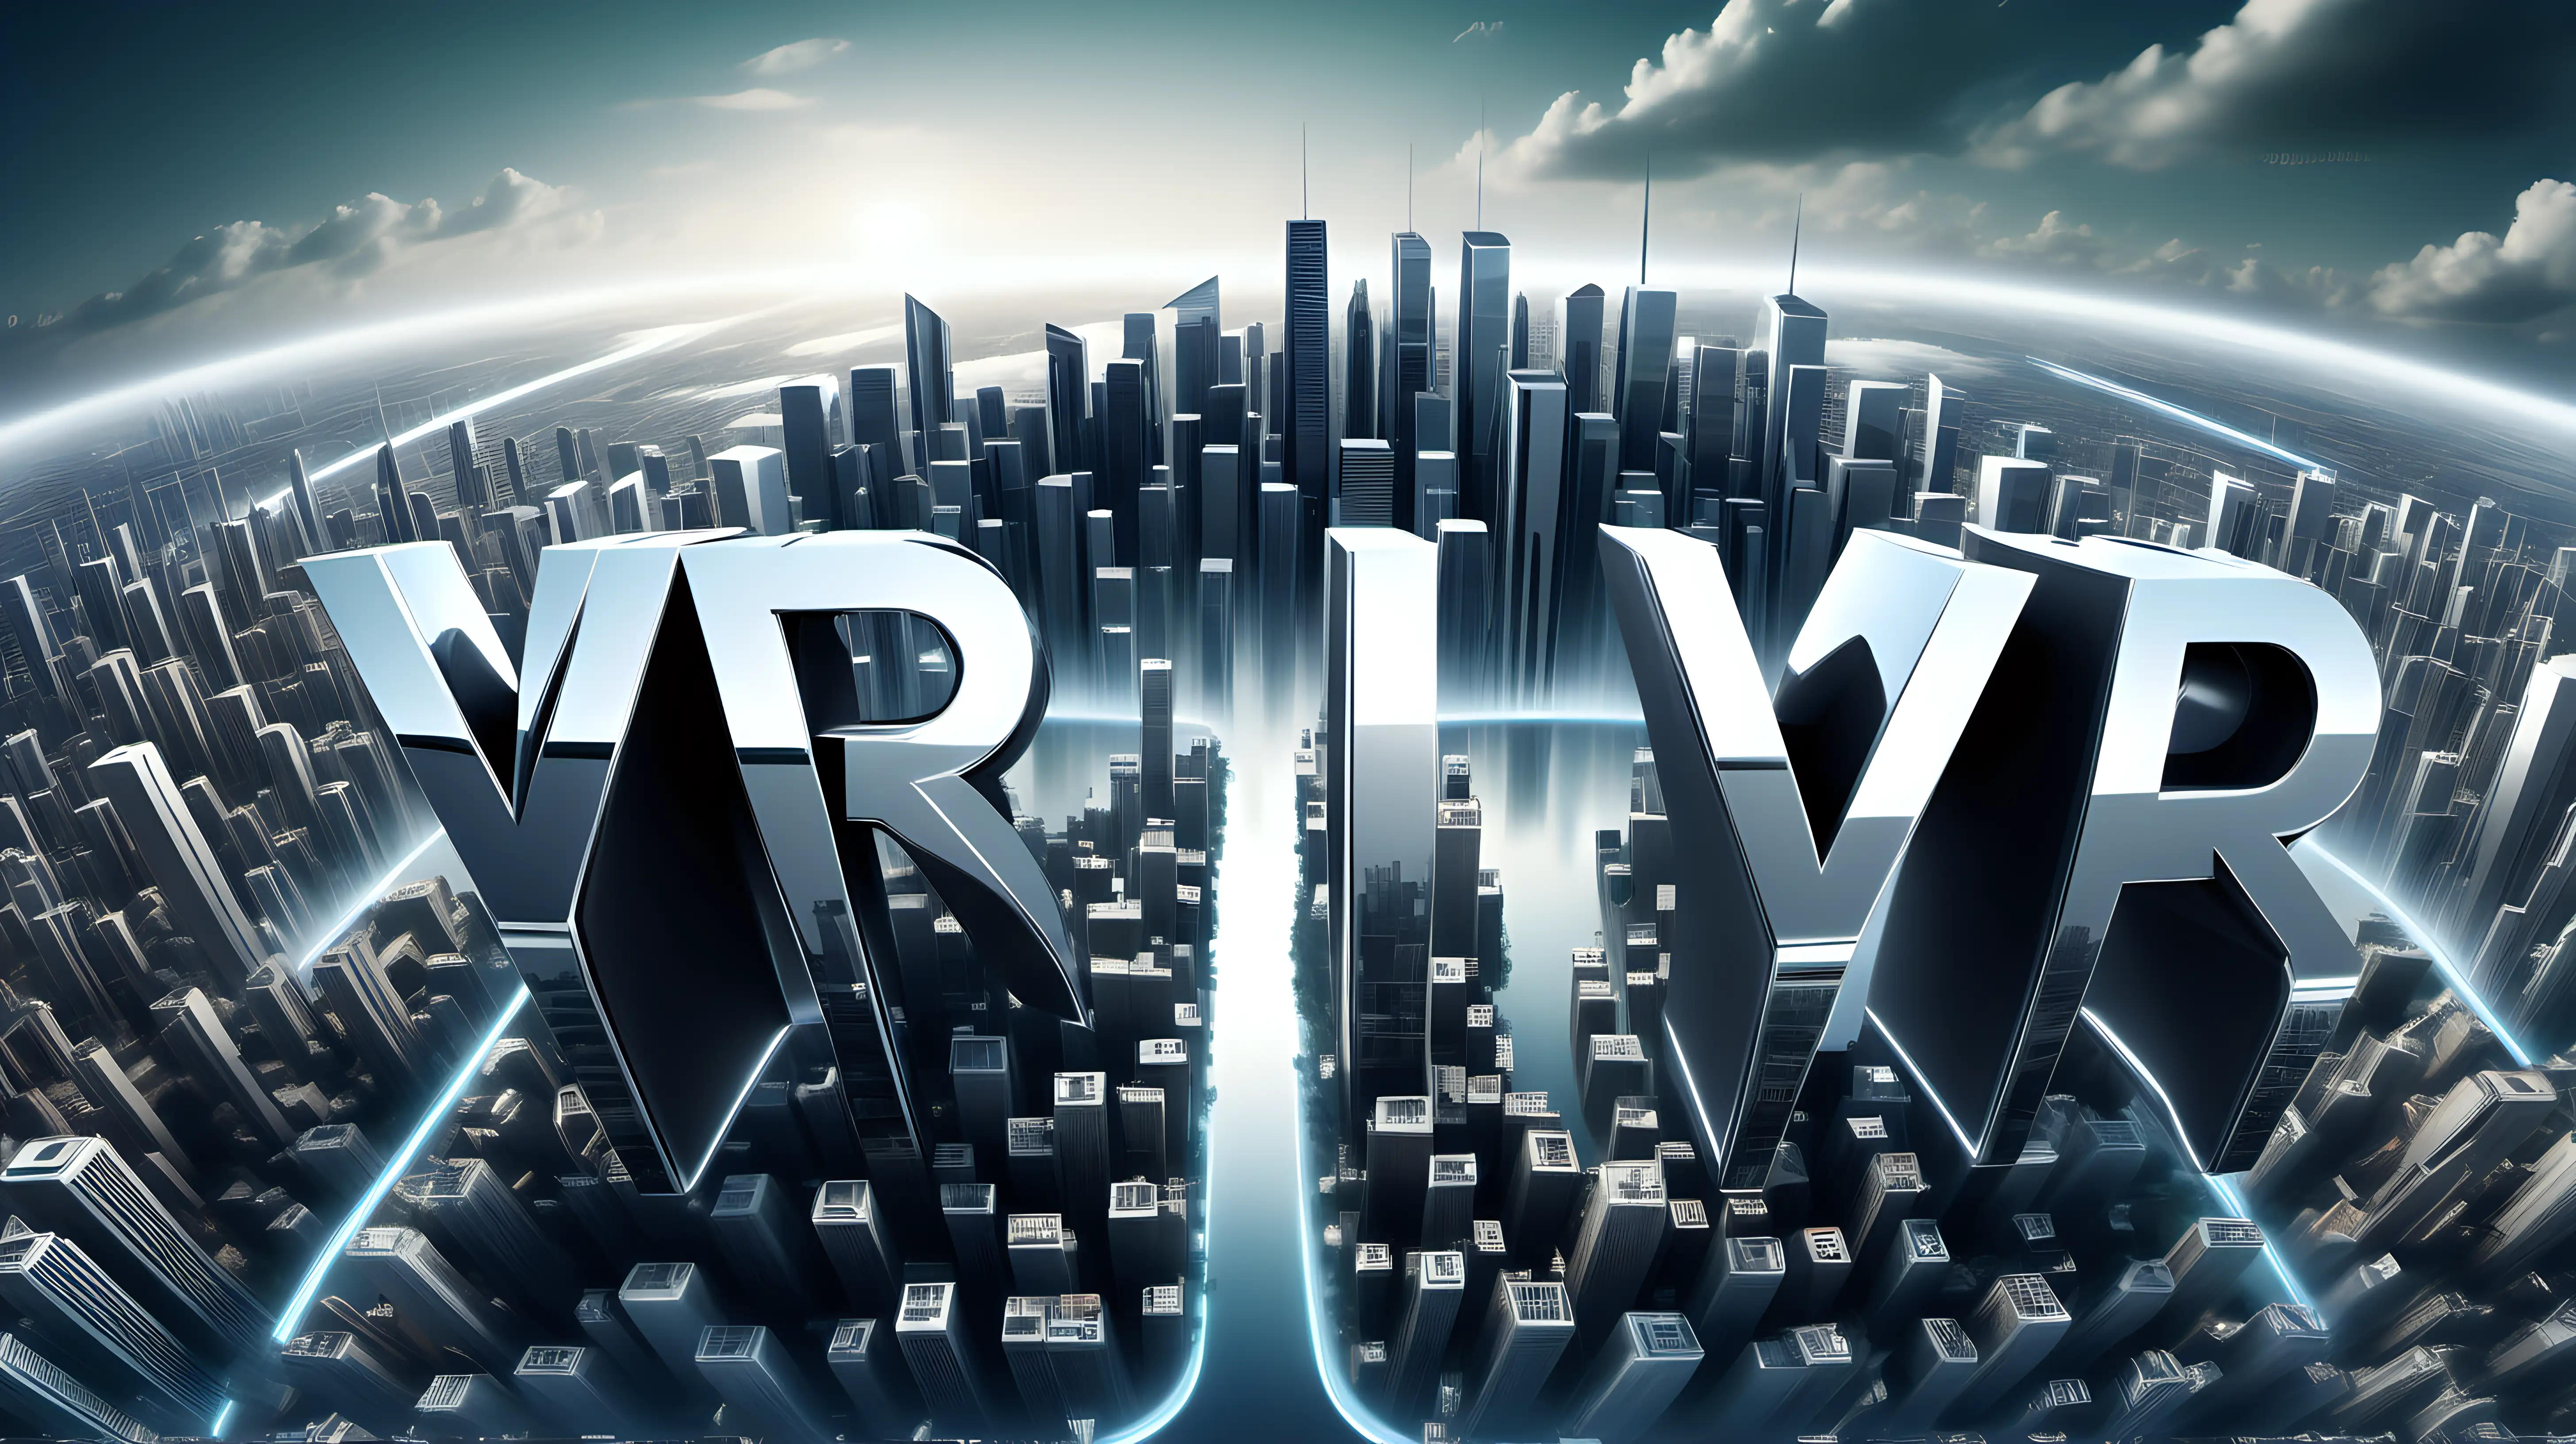 "VR" depicted in sleek, chrome lettering hovering over a digital cityscape, reflecting the futuristic nature of virtual reality technology.